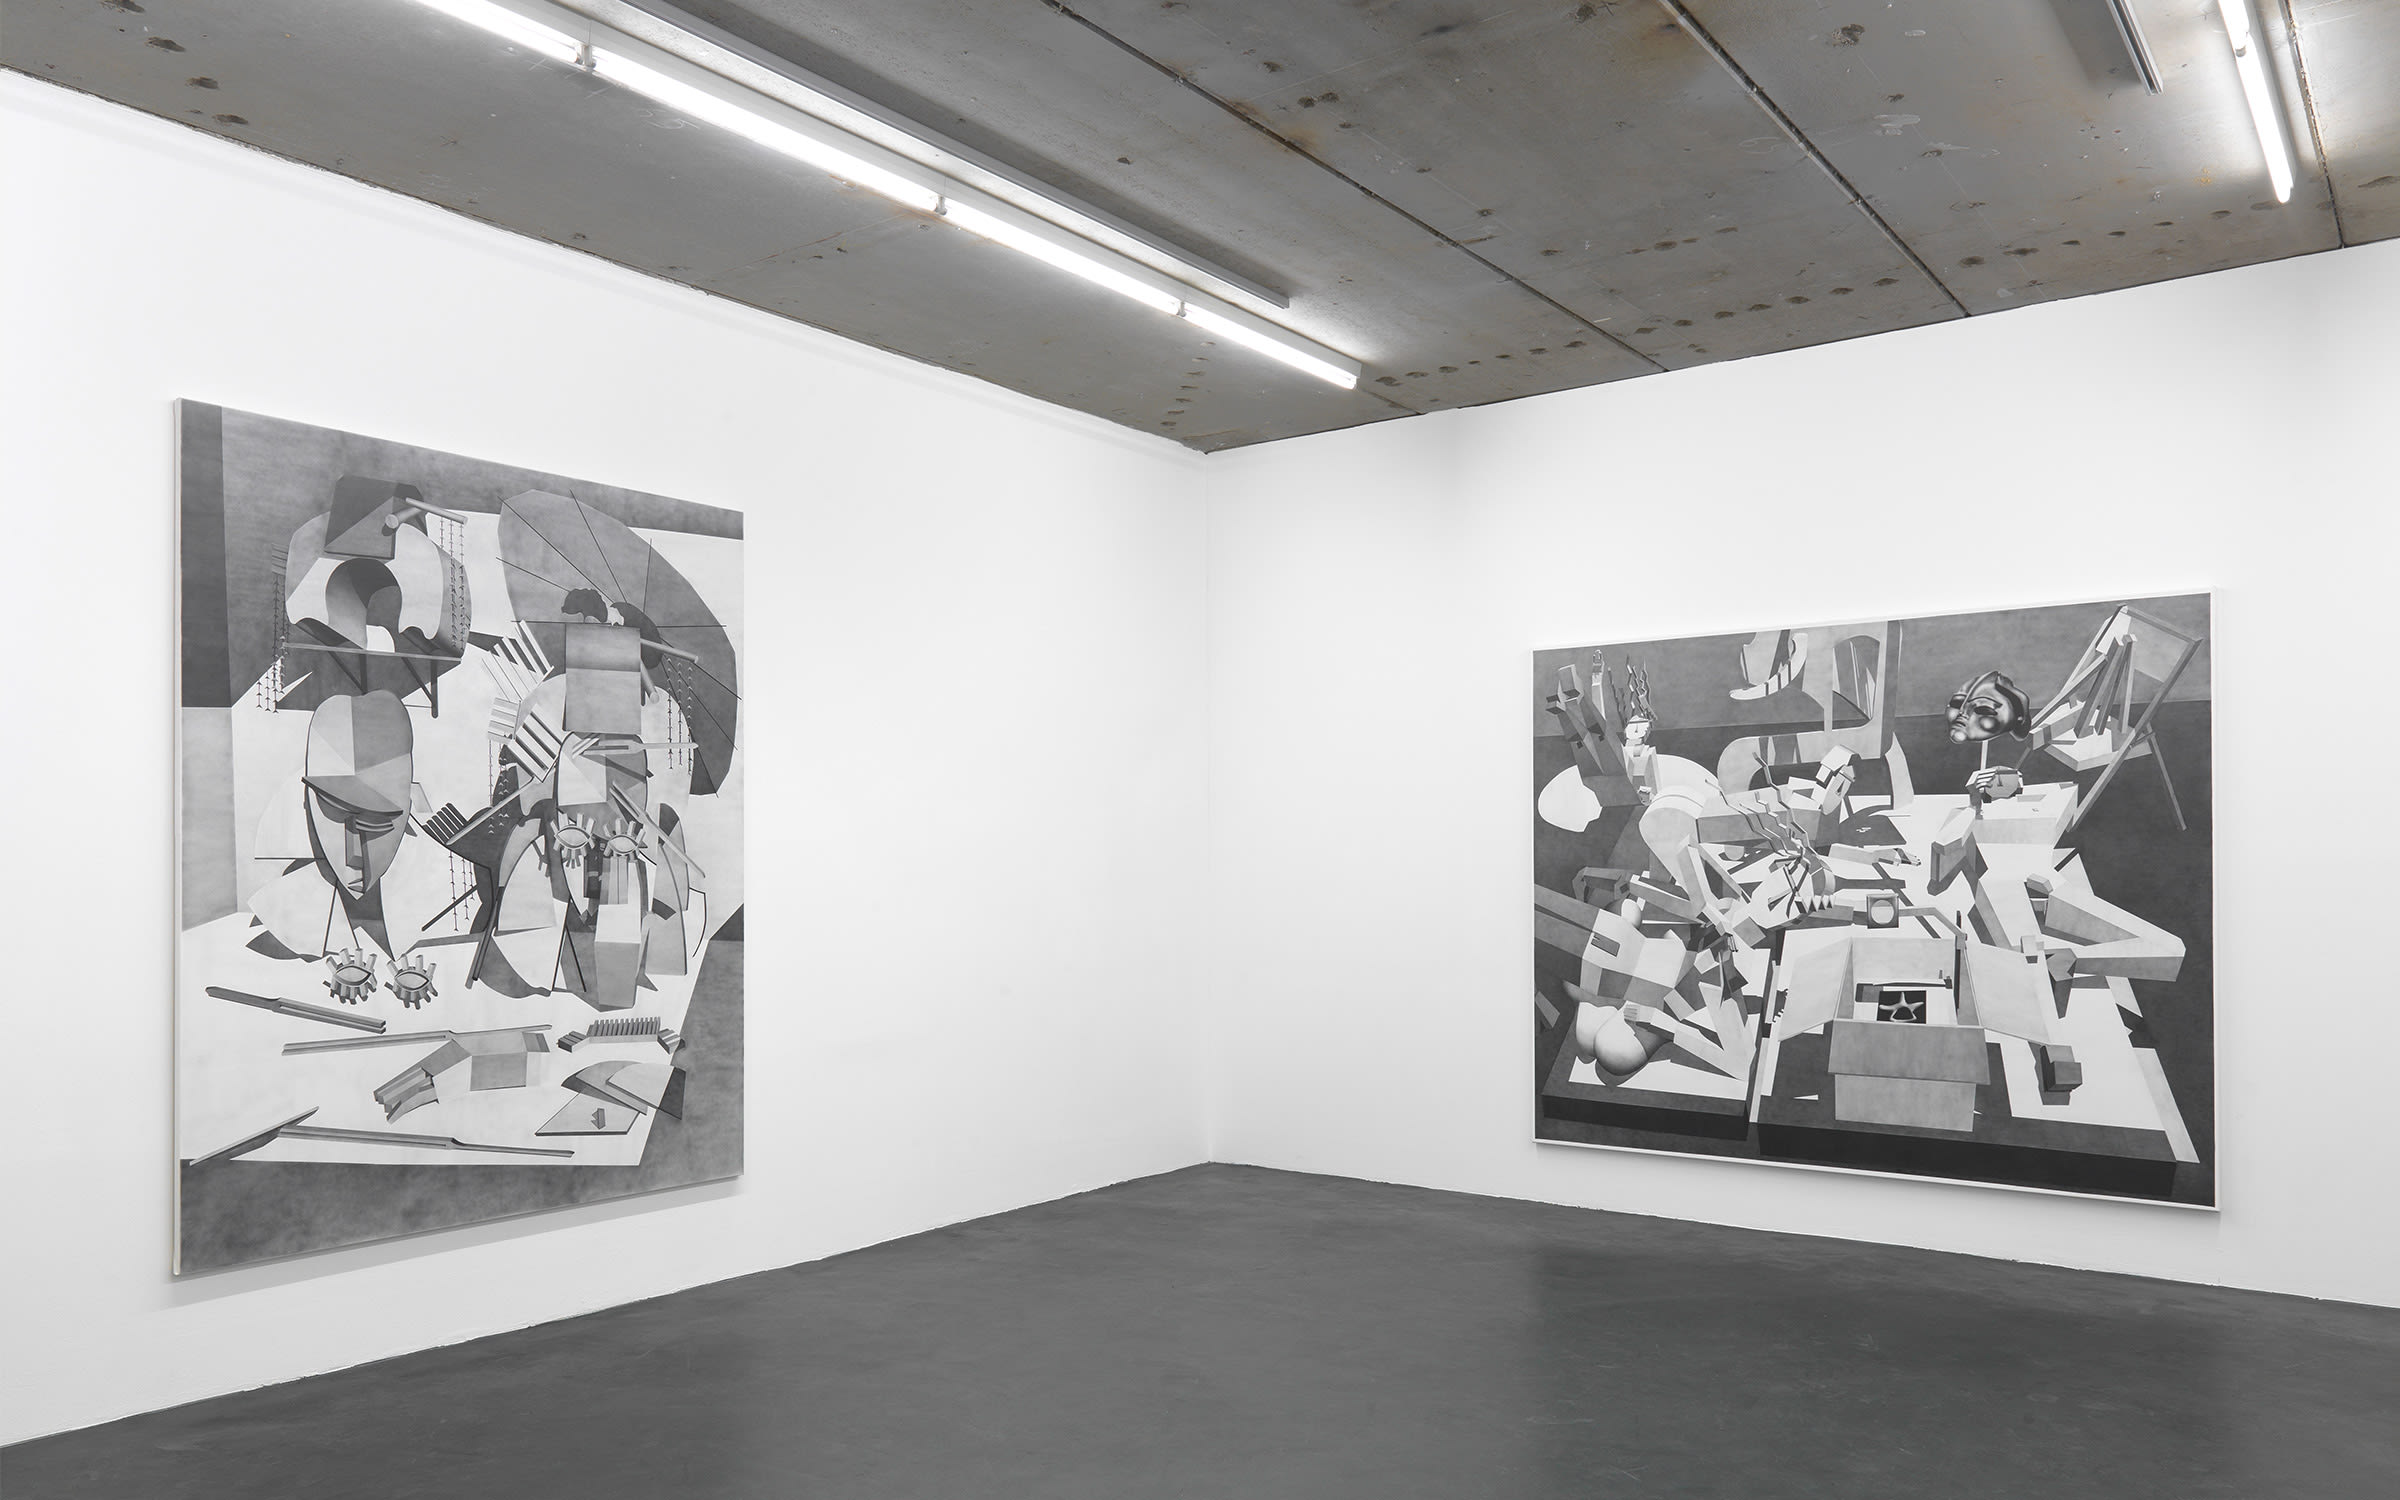 Installation view of Avery Singer's exhibition ‘The Artists’ at Kraupa- Tuskany Zeidler, Berlin, 2013. Courtesy of the artist and Kraupa-Tuskany Zeidler, Berlin. Photo by Roman März.